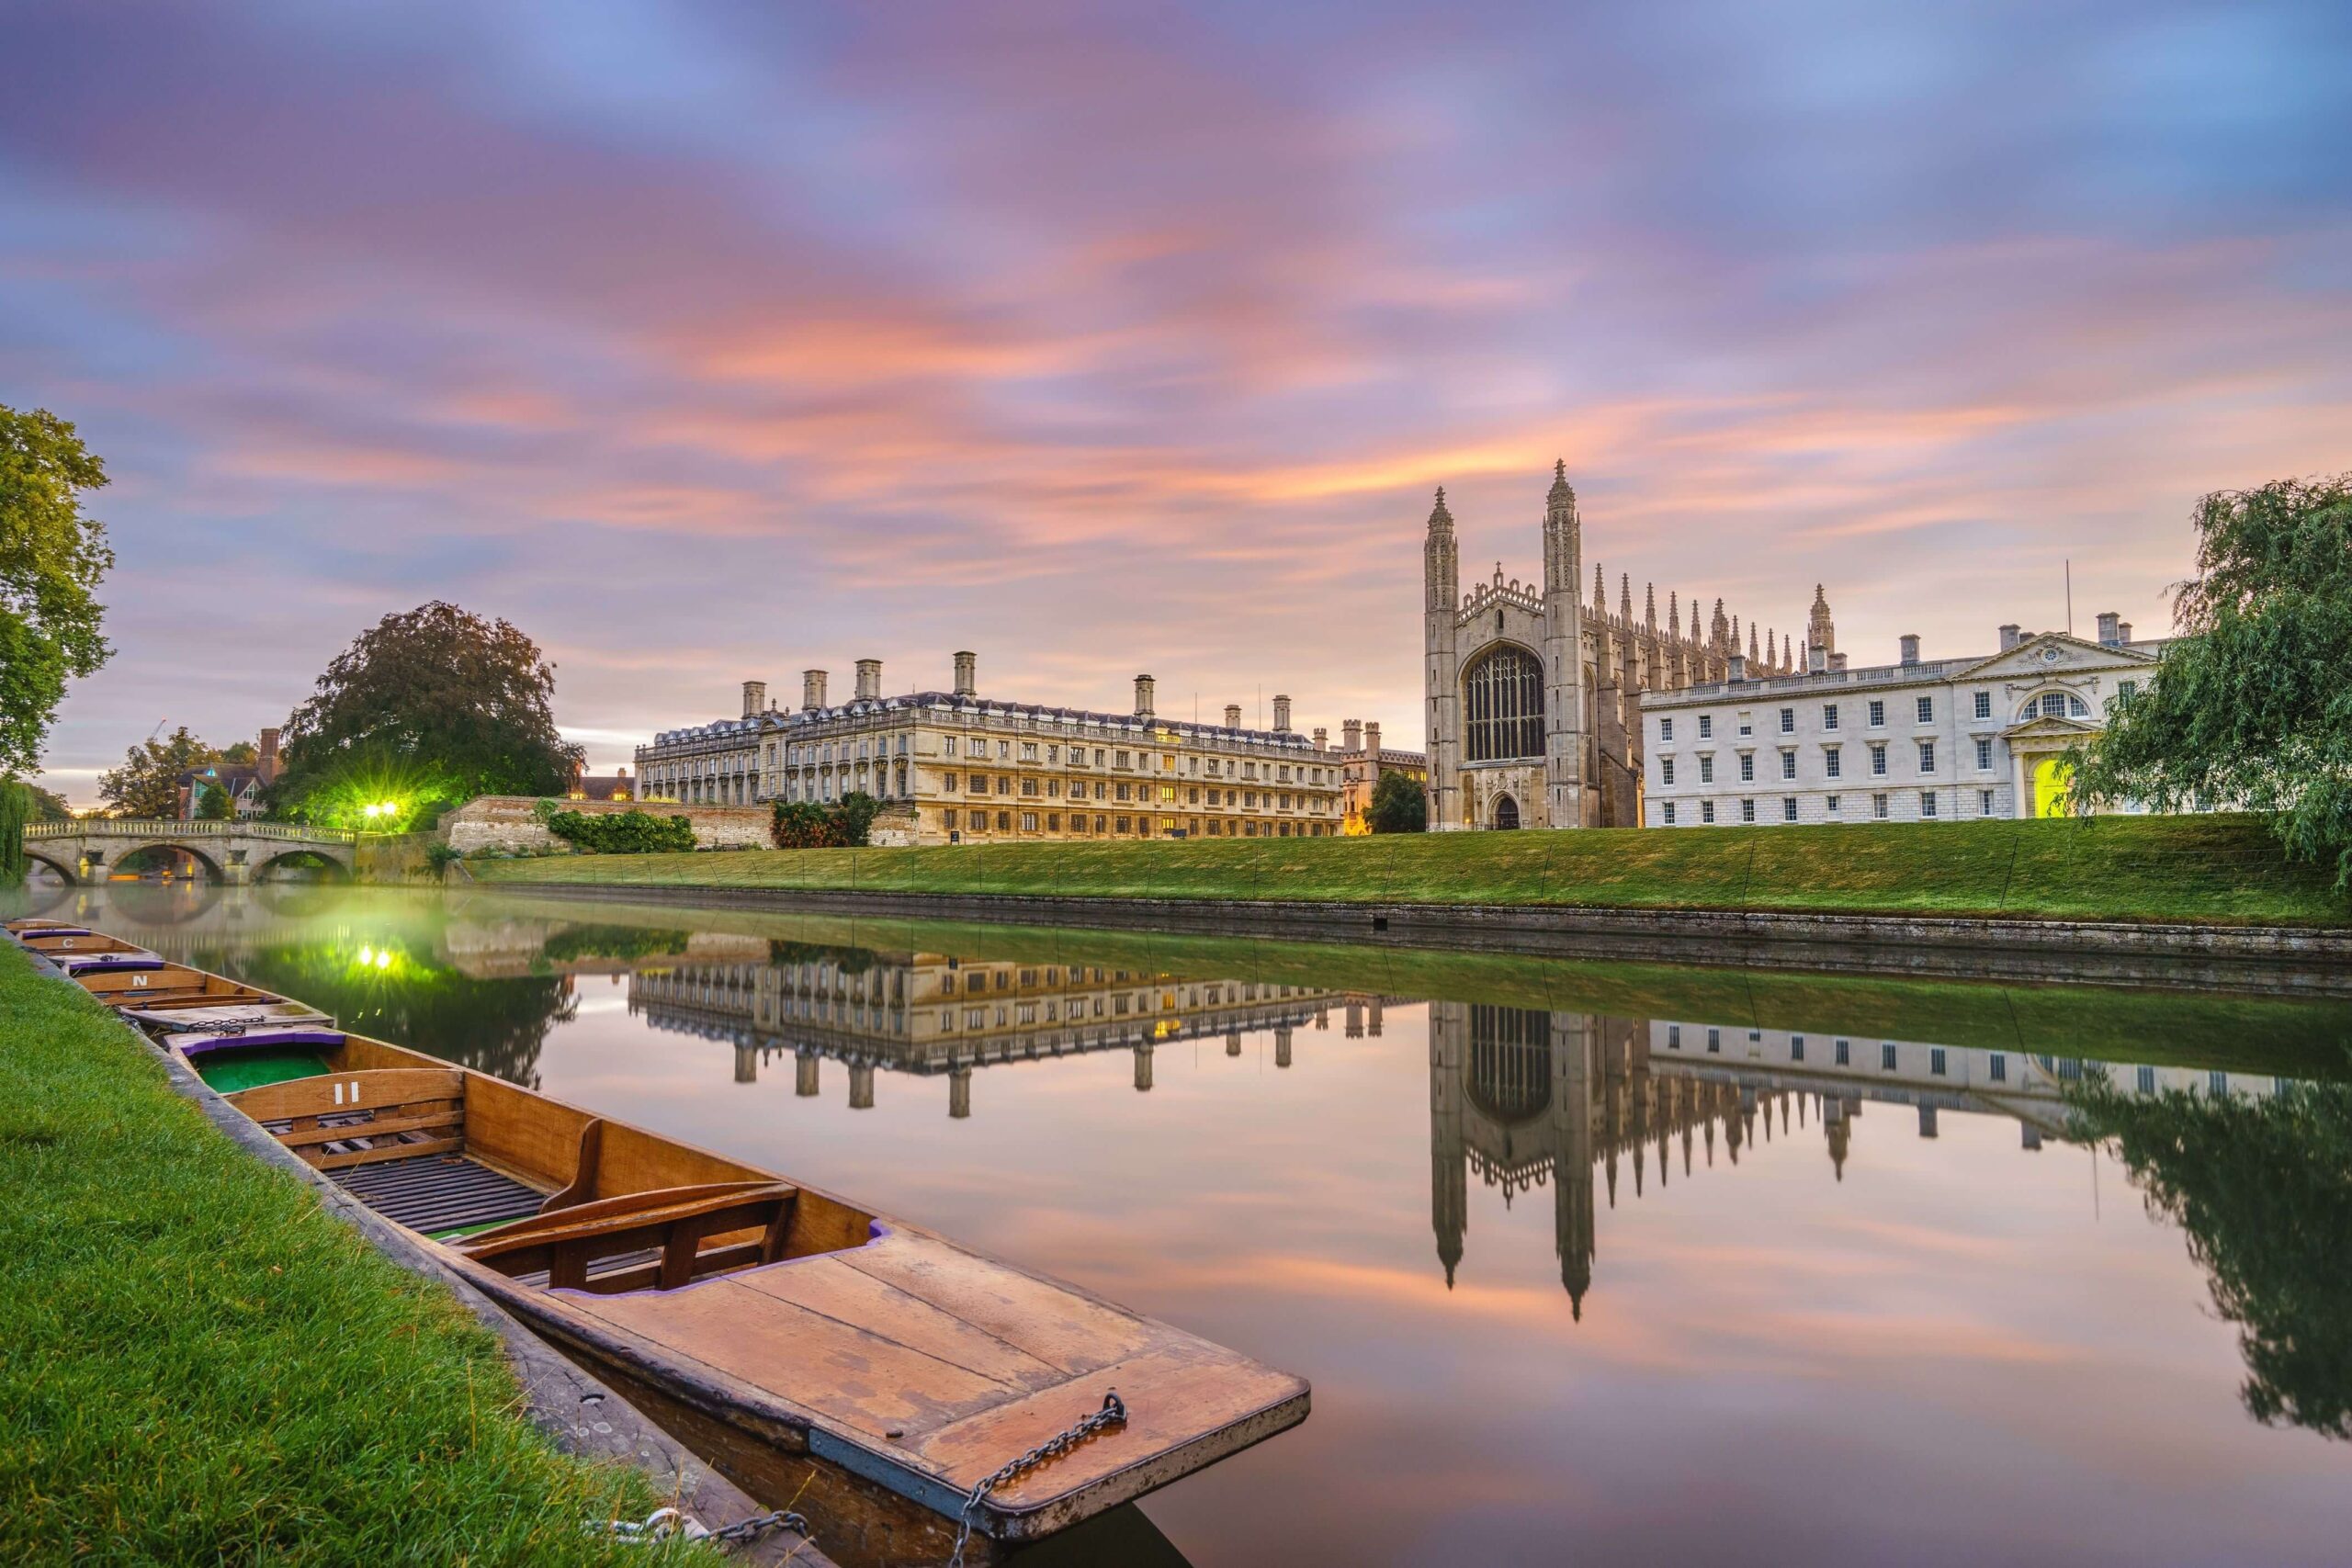 New Year UK-Cambridge and Oxford Holiday Travel & Tour Package